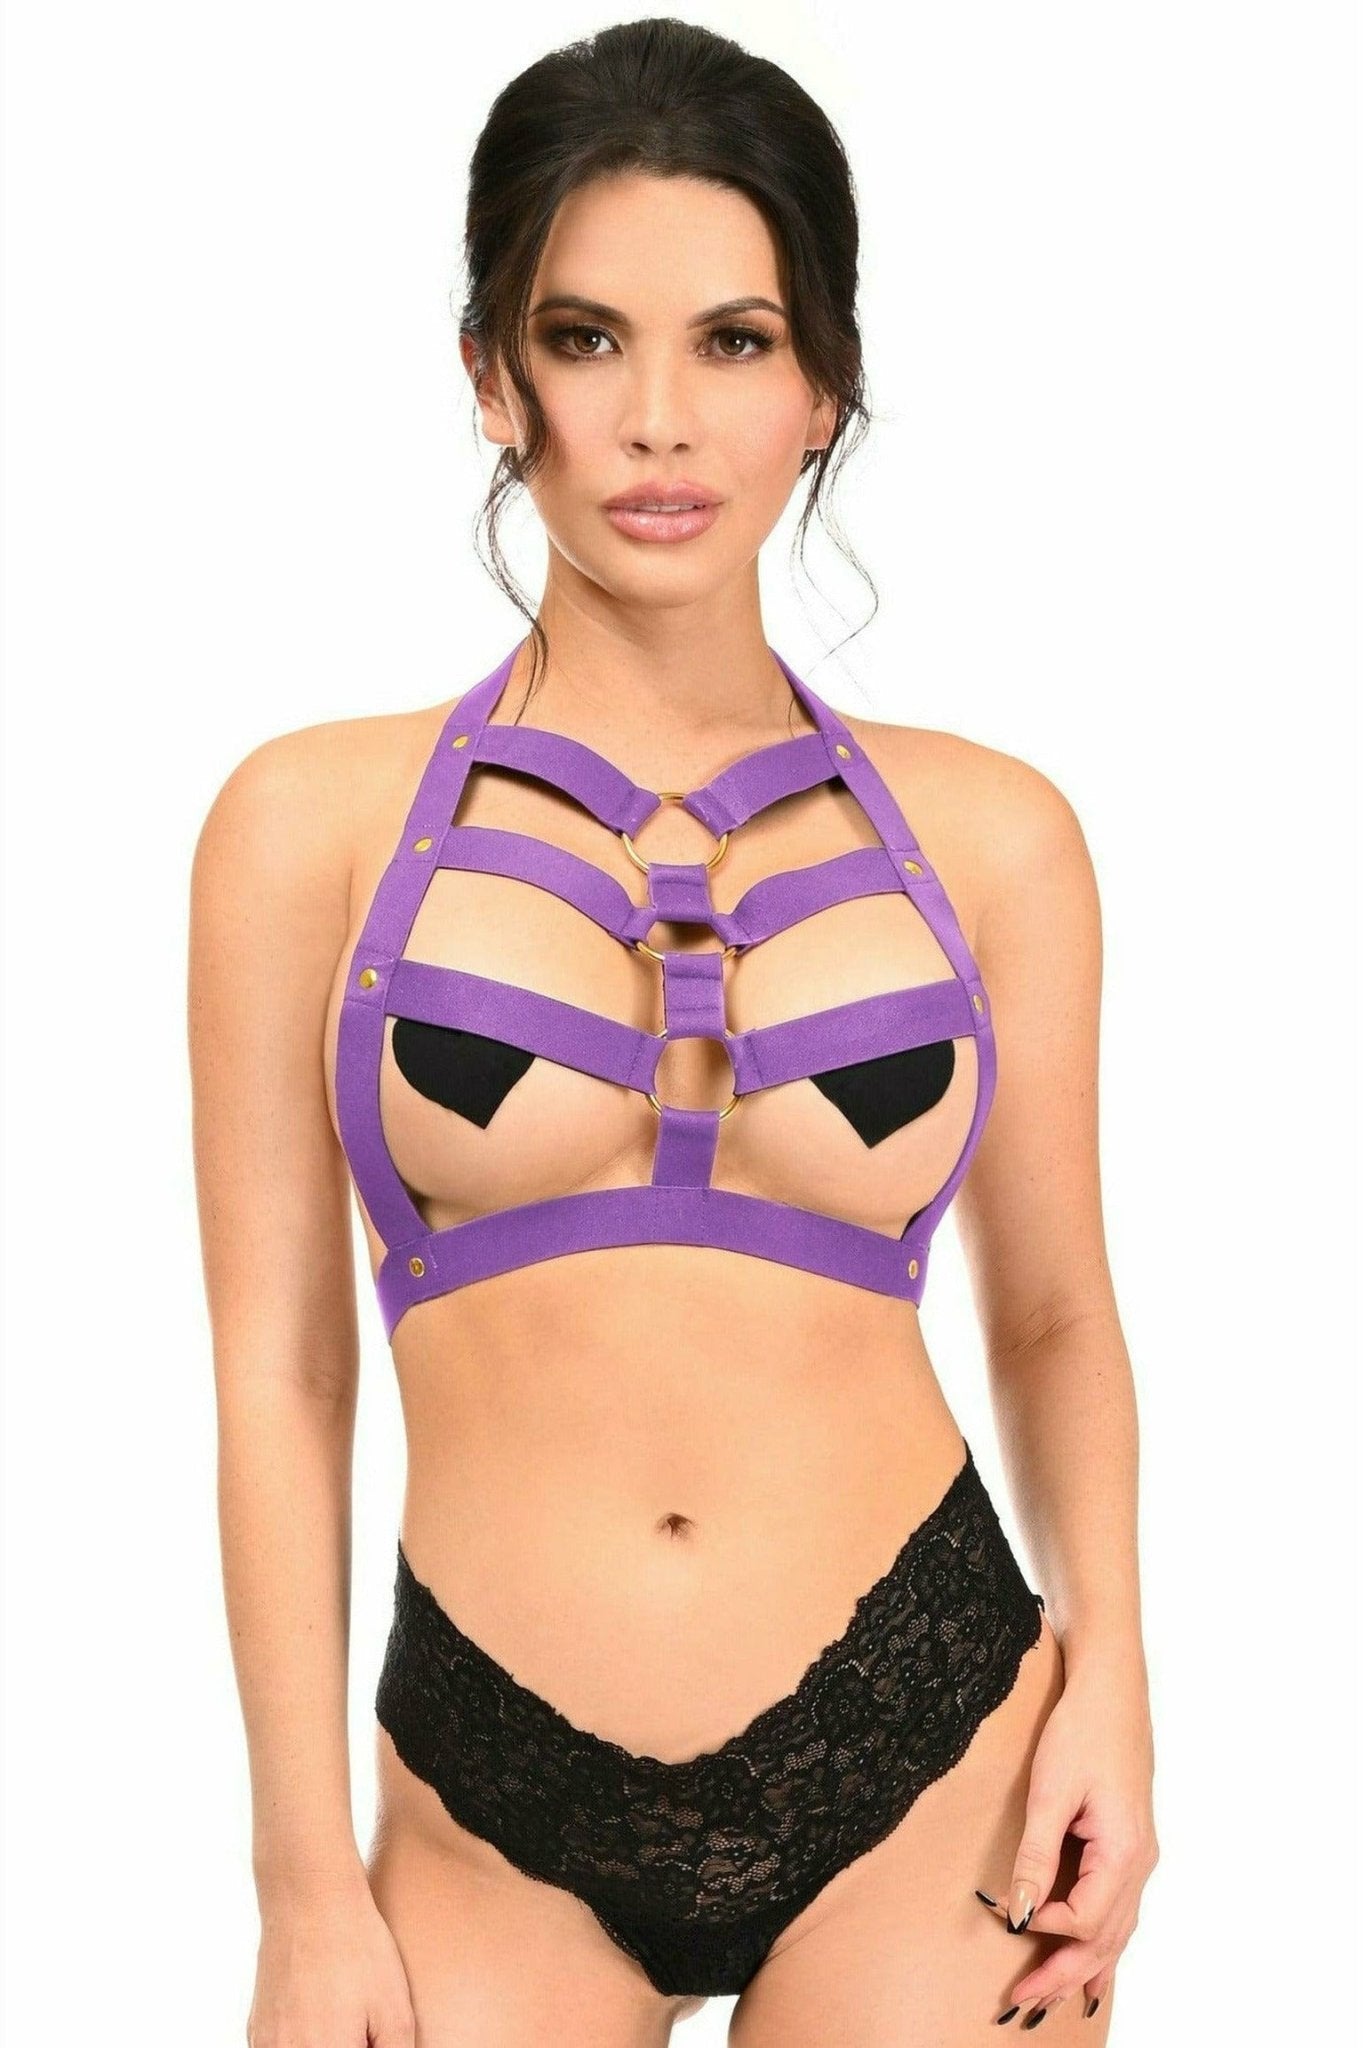 Dark Purple Stretchy Body Harness with Gold Hardware Musotica.com